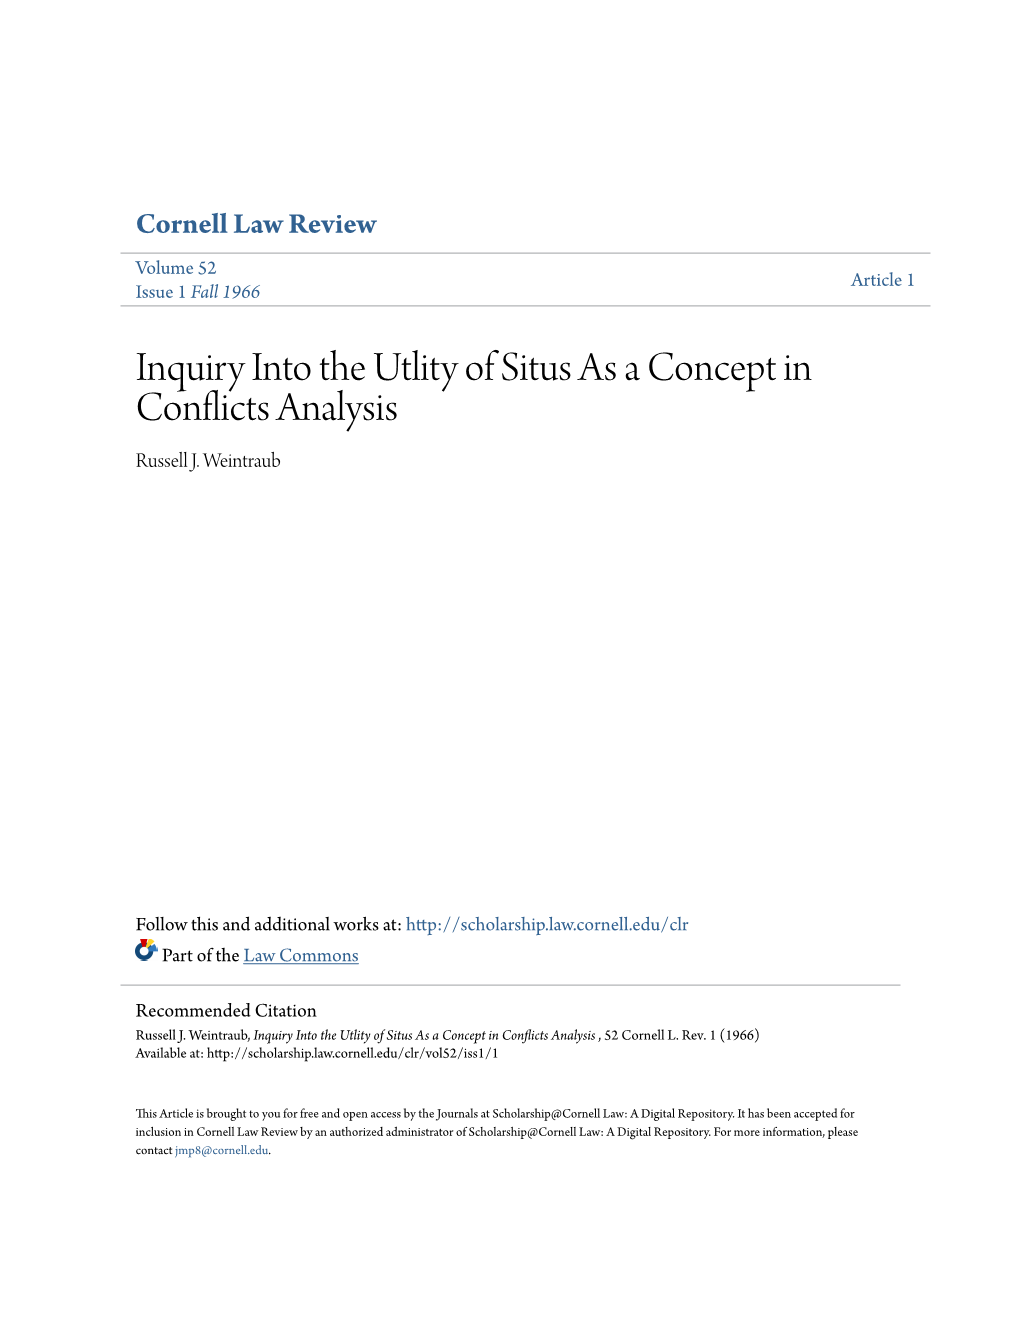 Inquiry Into the Utlity of Situs As a Concept in Conflicts Analysis Russell J